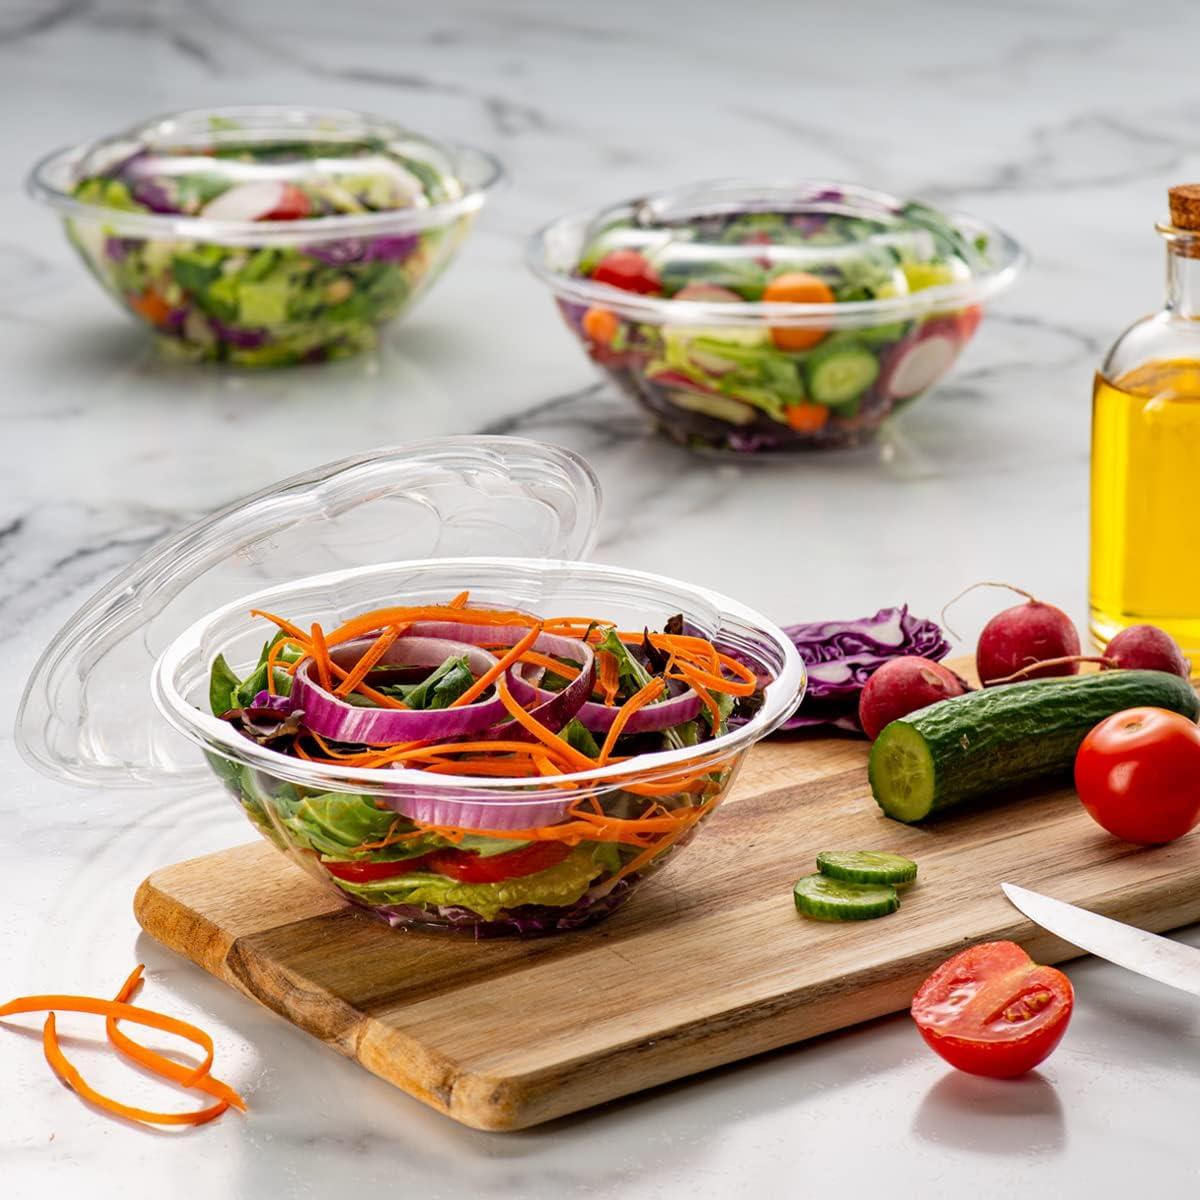 Choice 24 oz. Clear Plastic Salad Bowl with Lid - 150/Case